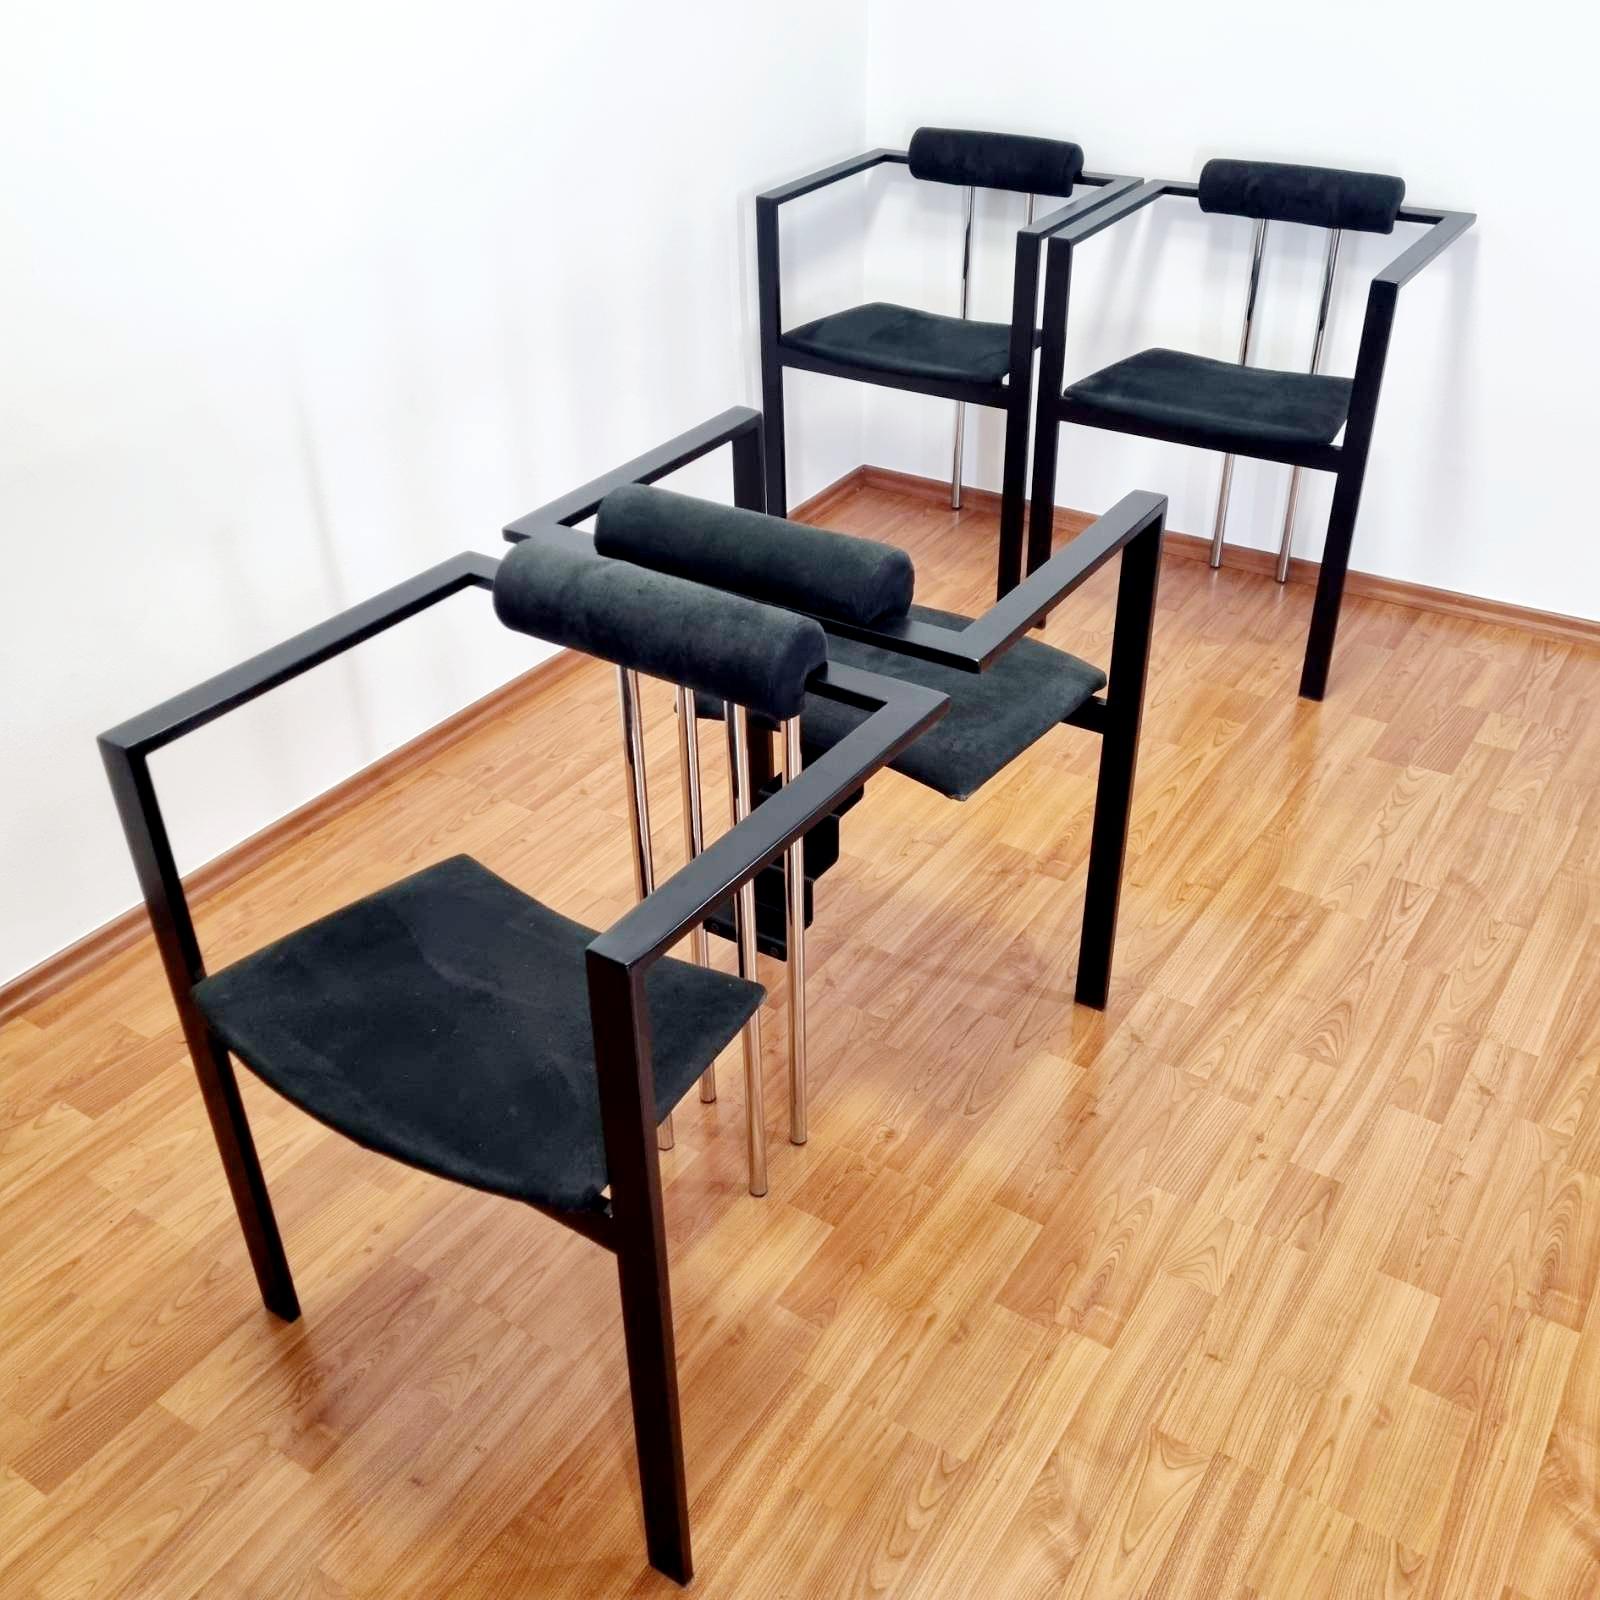 Nice set of 4 Postmodern chairs designed by Karl Friederich Forster for KFF